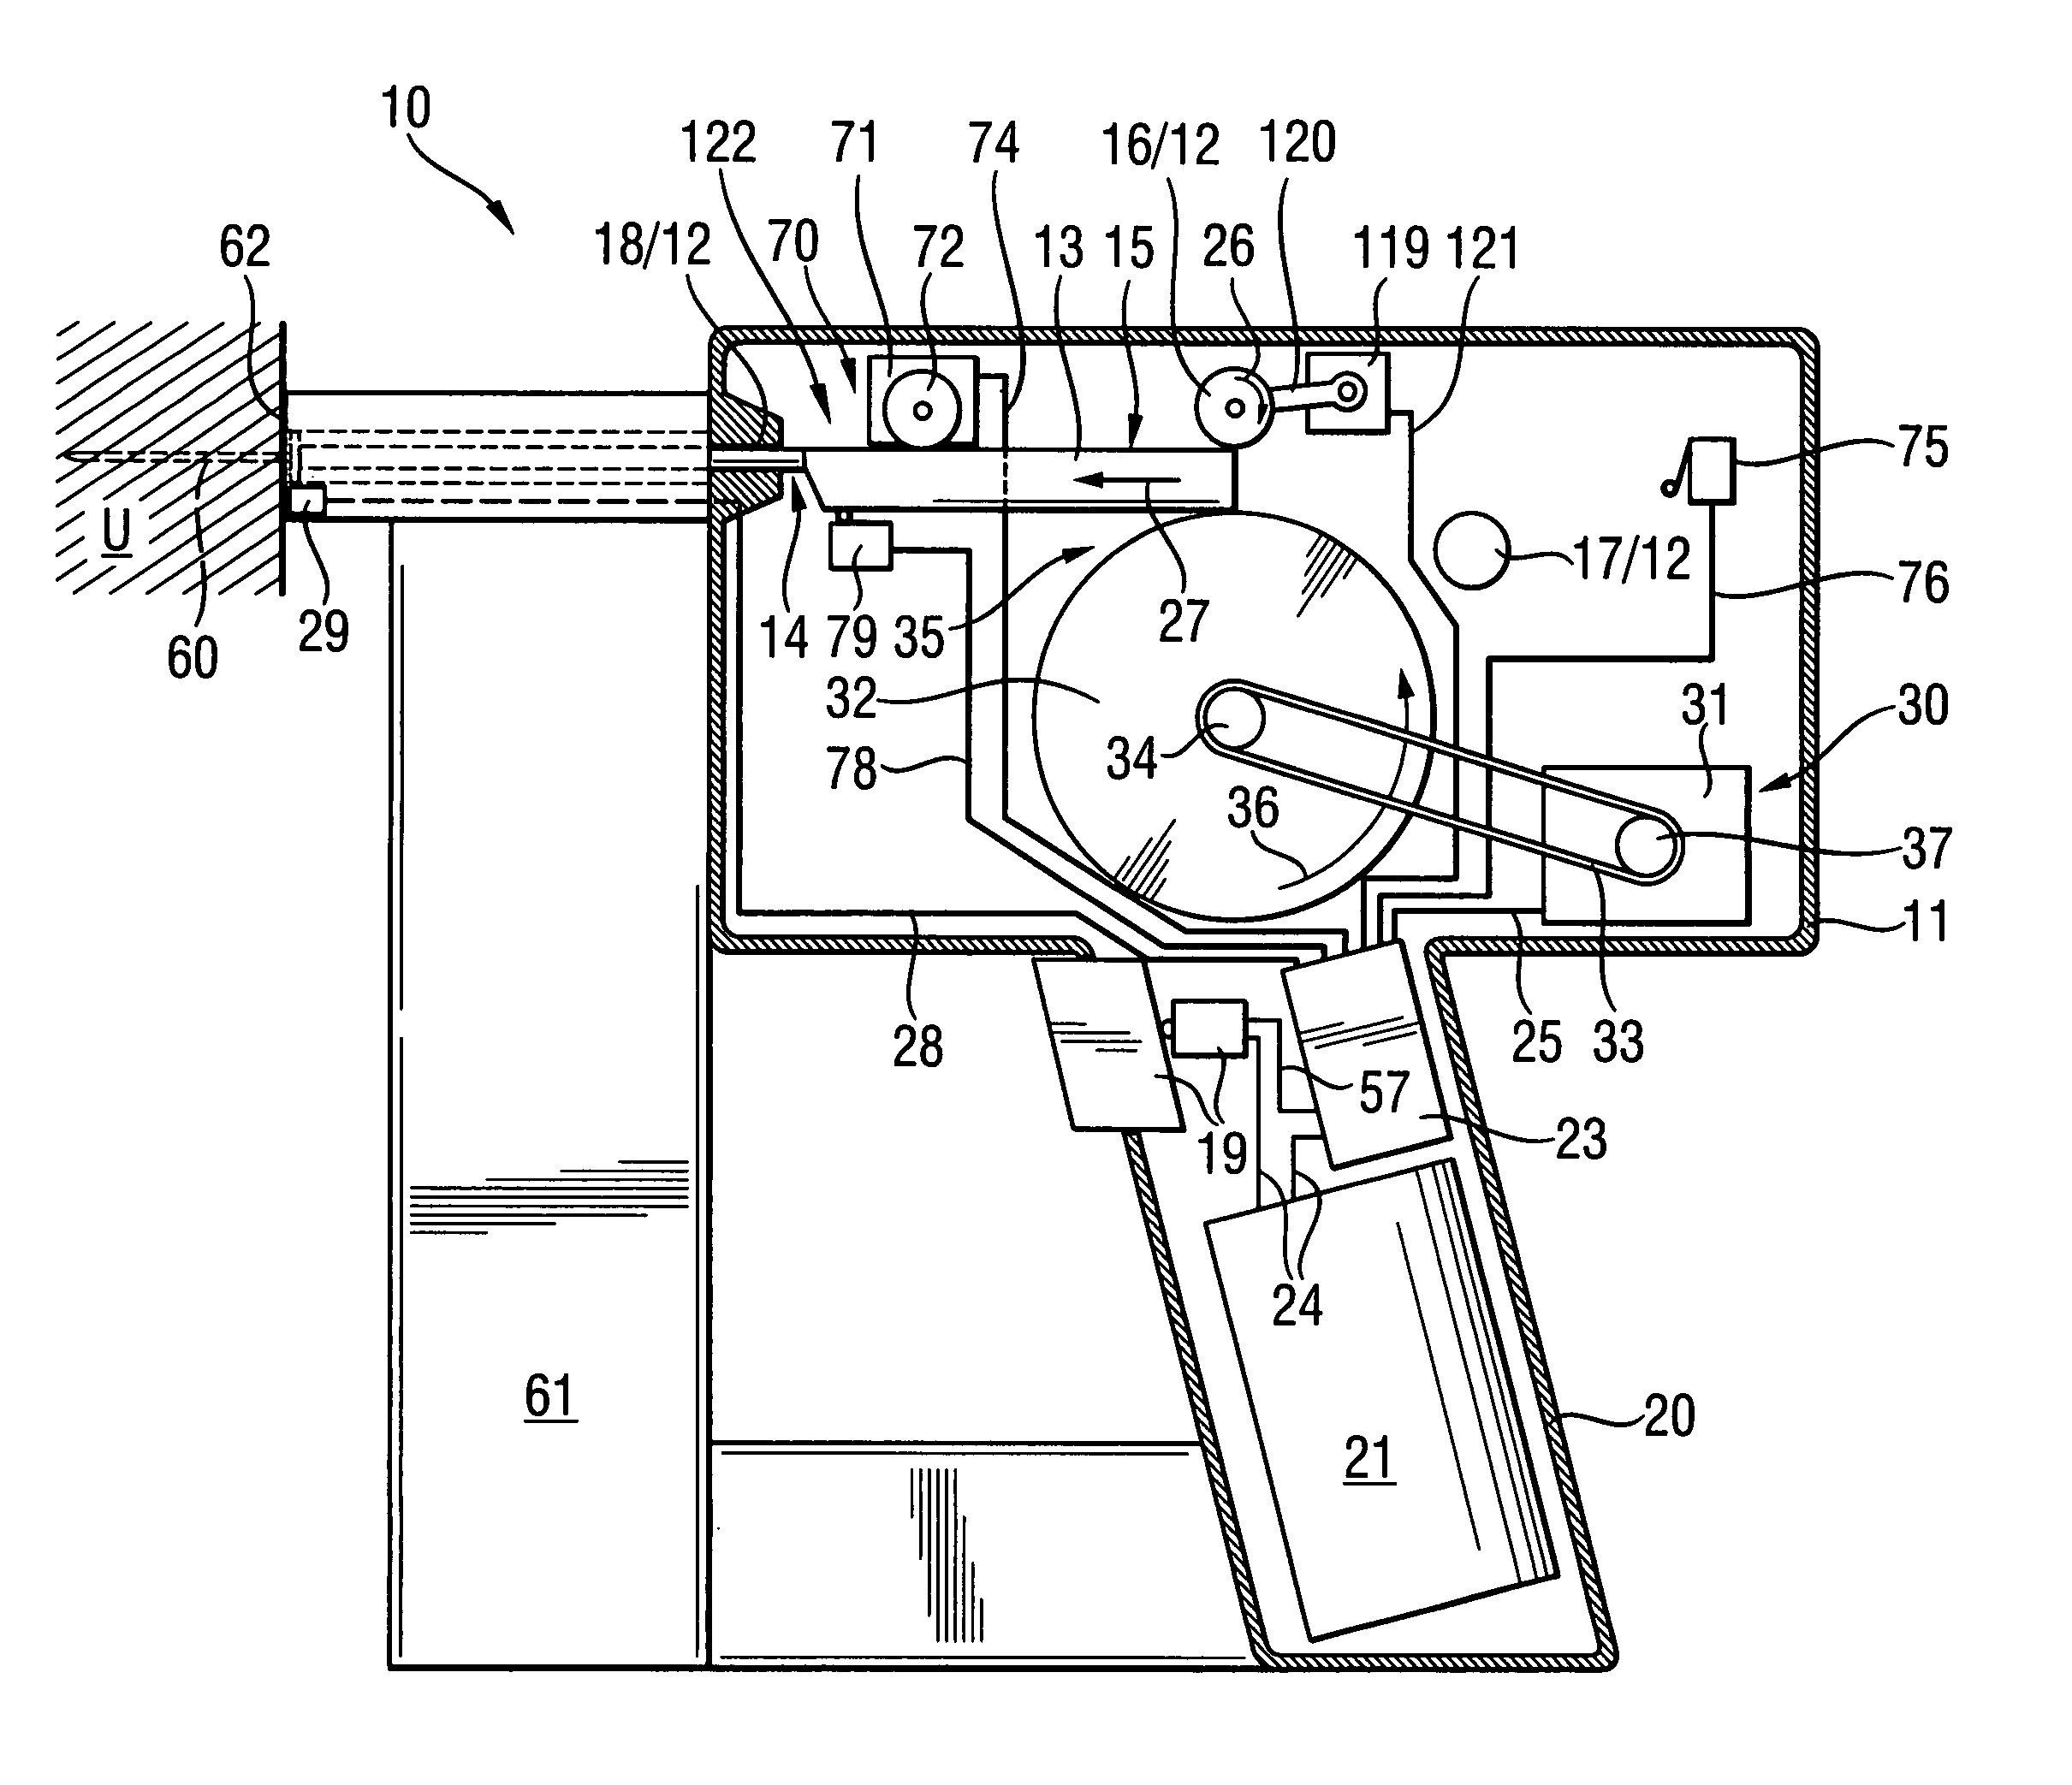 Electrically operated drive-in tool